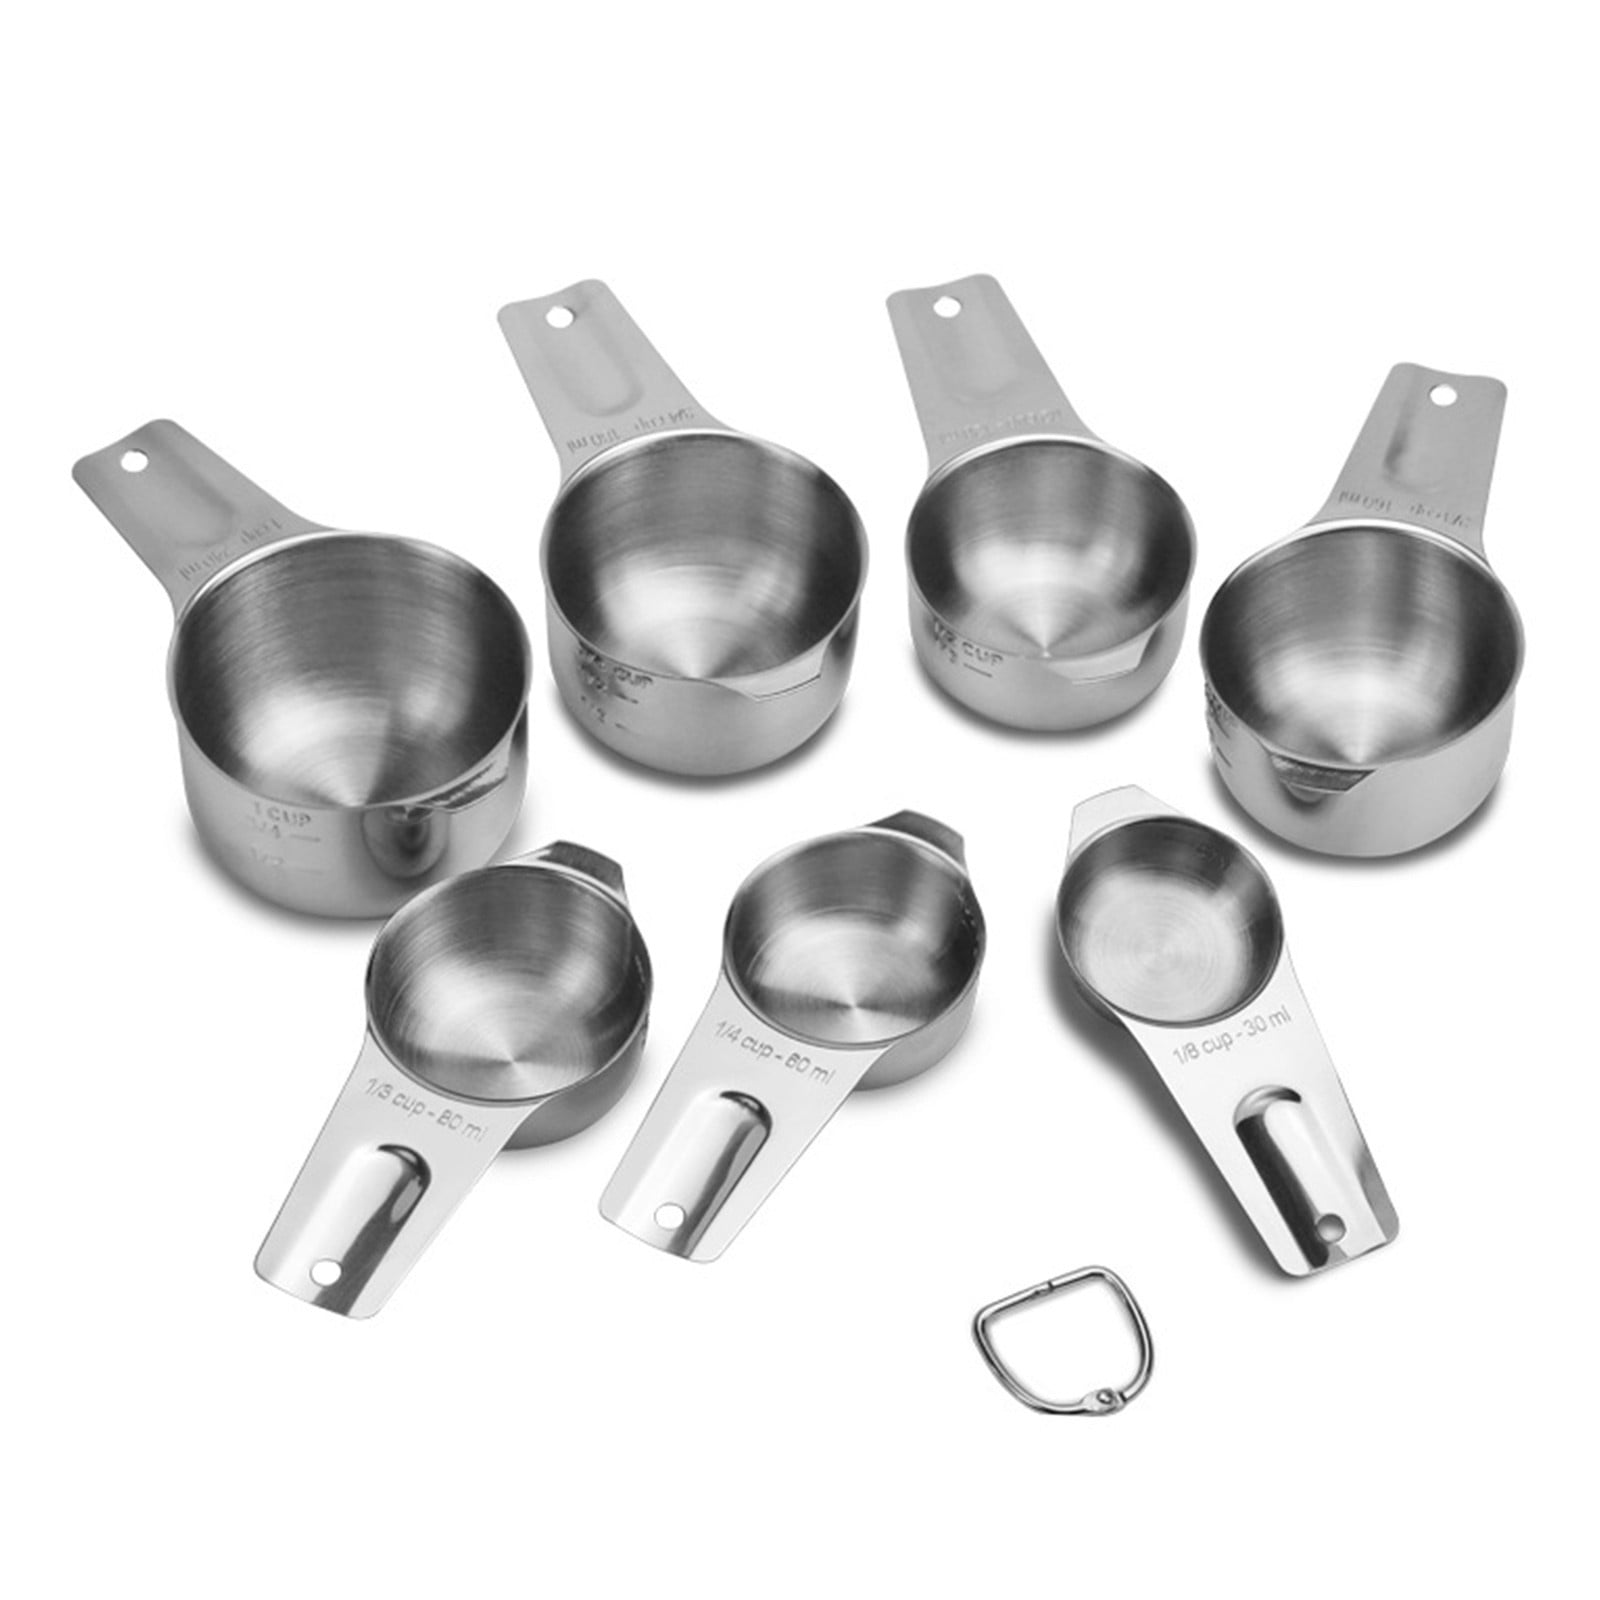  Viwehots Measuring Cups and Spoons Set, 18/8 Stainless Steel  Measuring Cups and Spoons Set with Leveler, Kitchen Metric Measure Cups & Spoons  Set for Baking, Metal Dry Measuring Cups Spoons Set